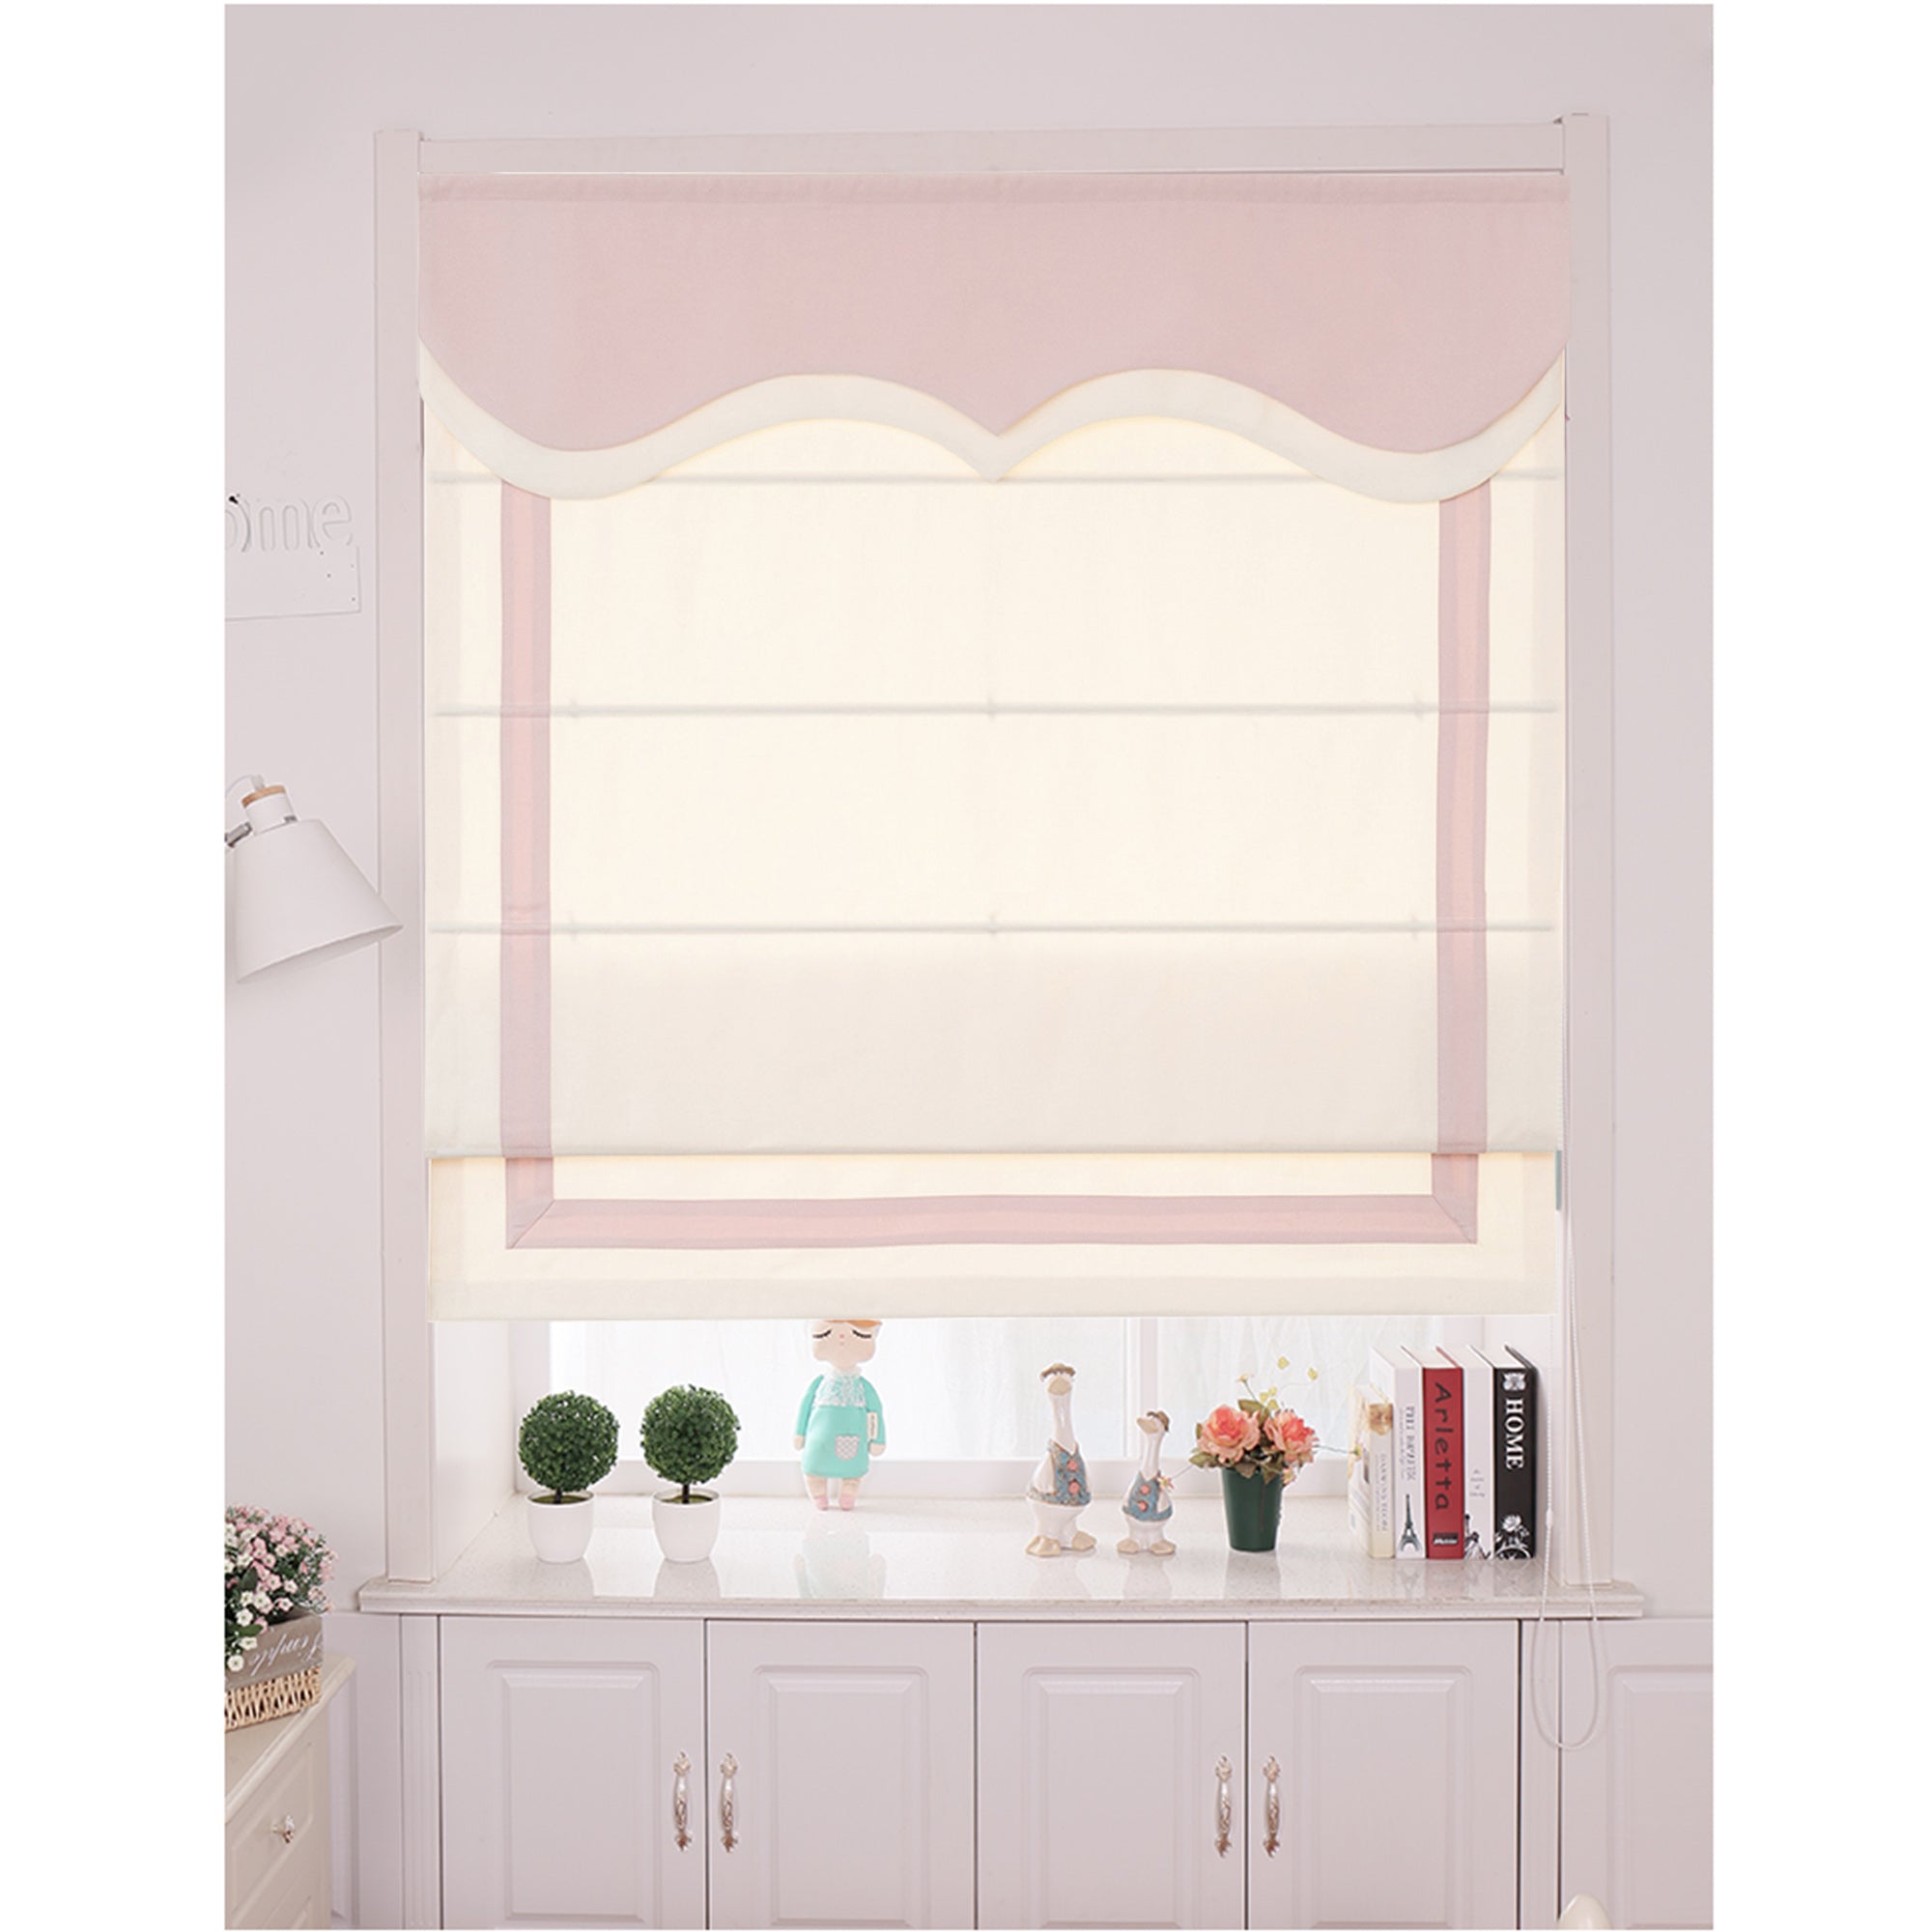 Quick Fix Washable Roman Window Shades Flat Fold with Valance SG-006 White with Pink Trim